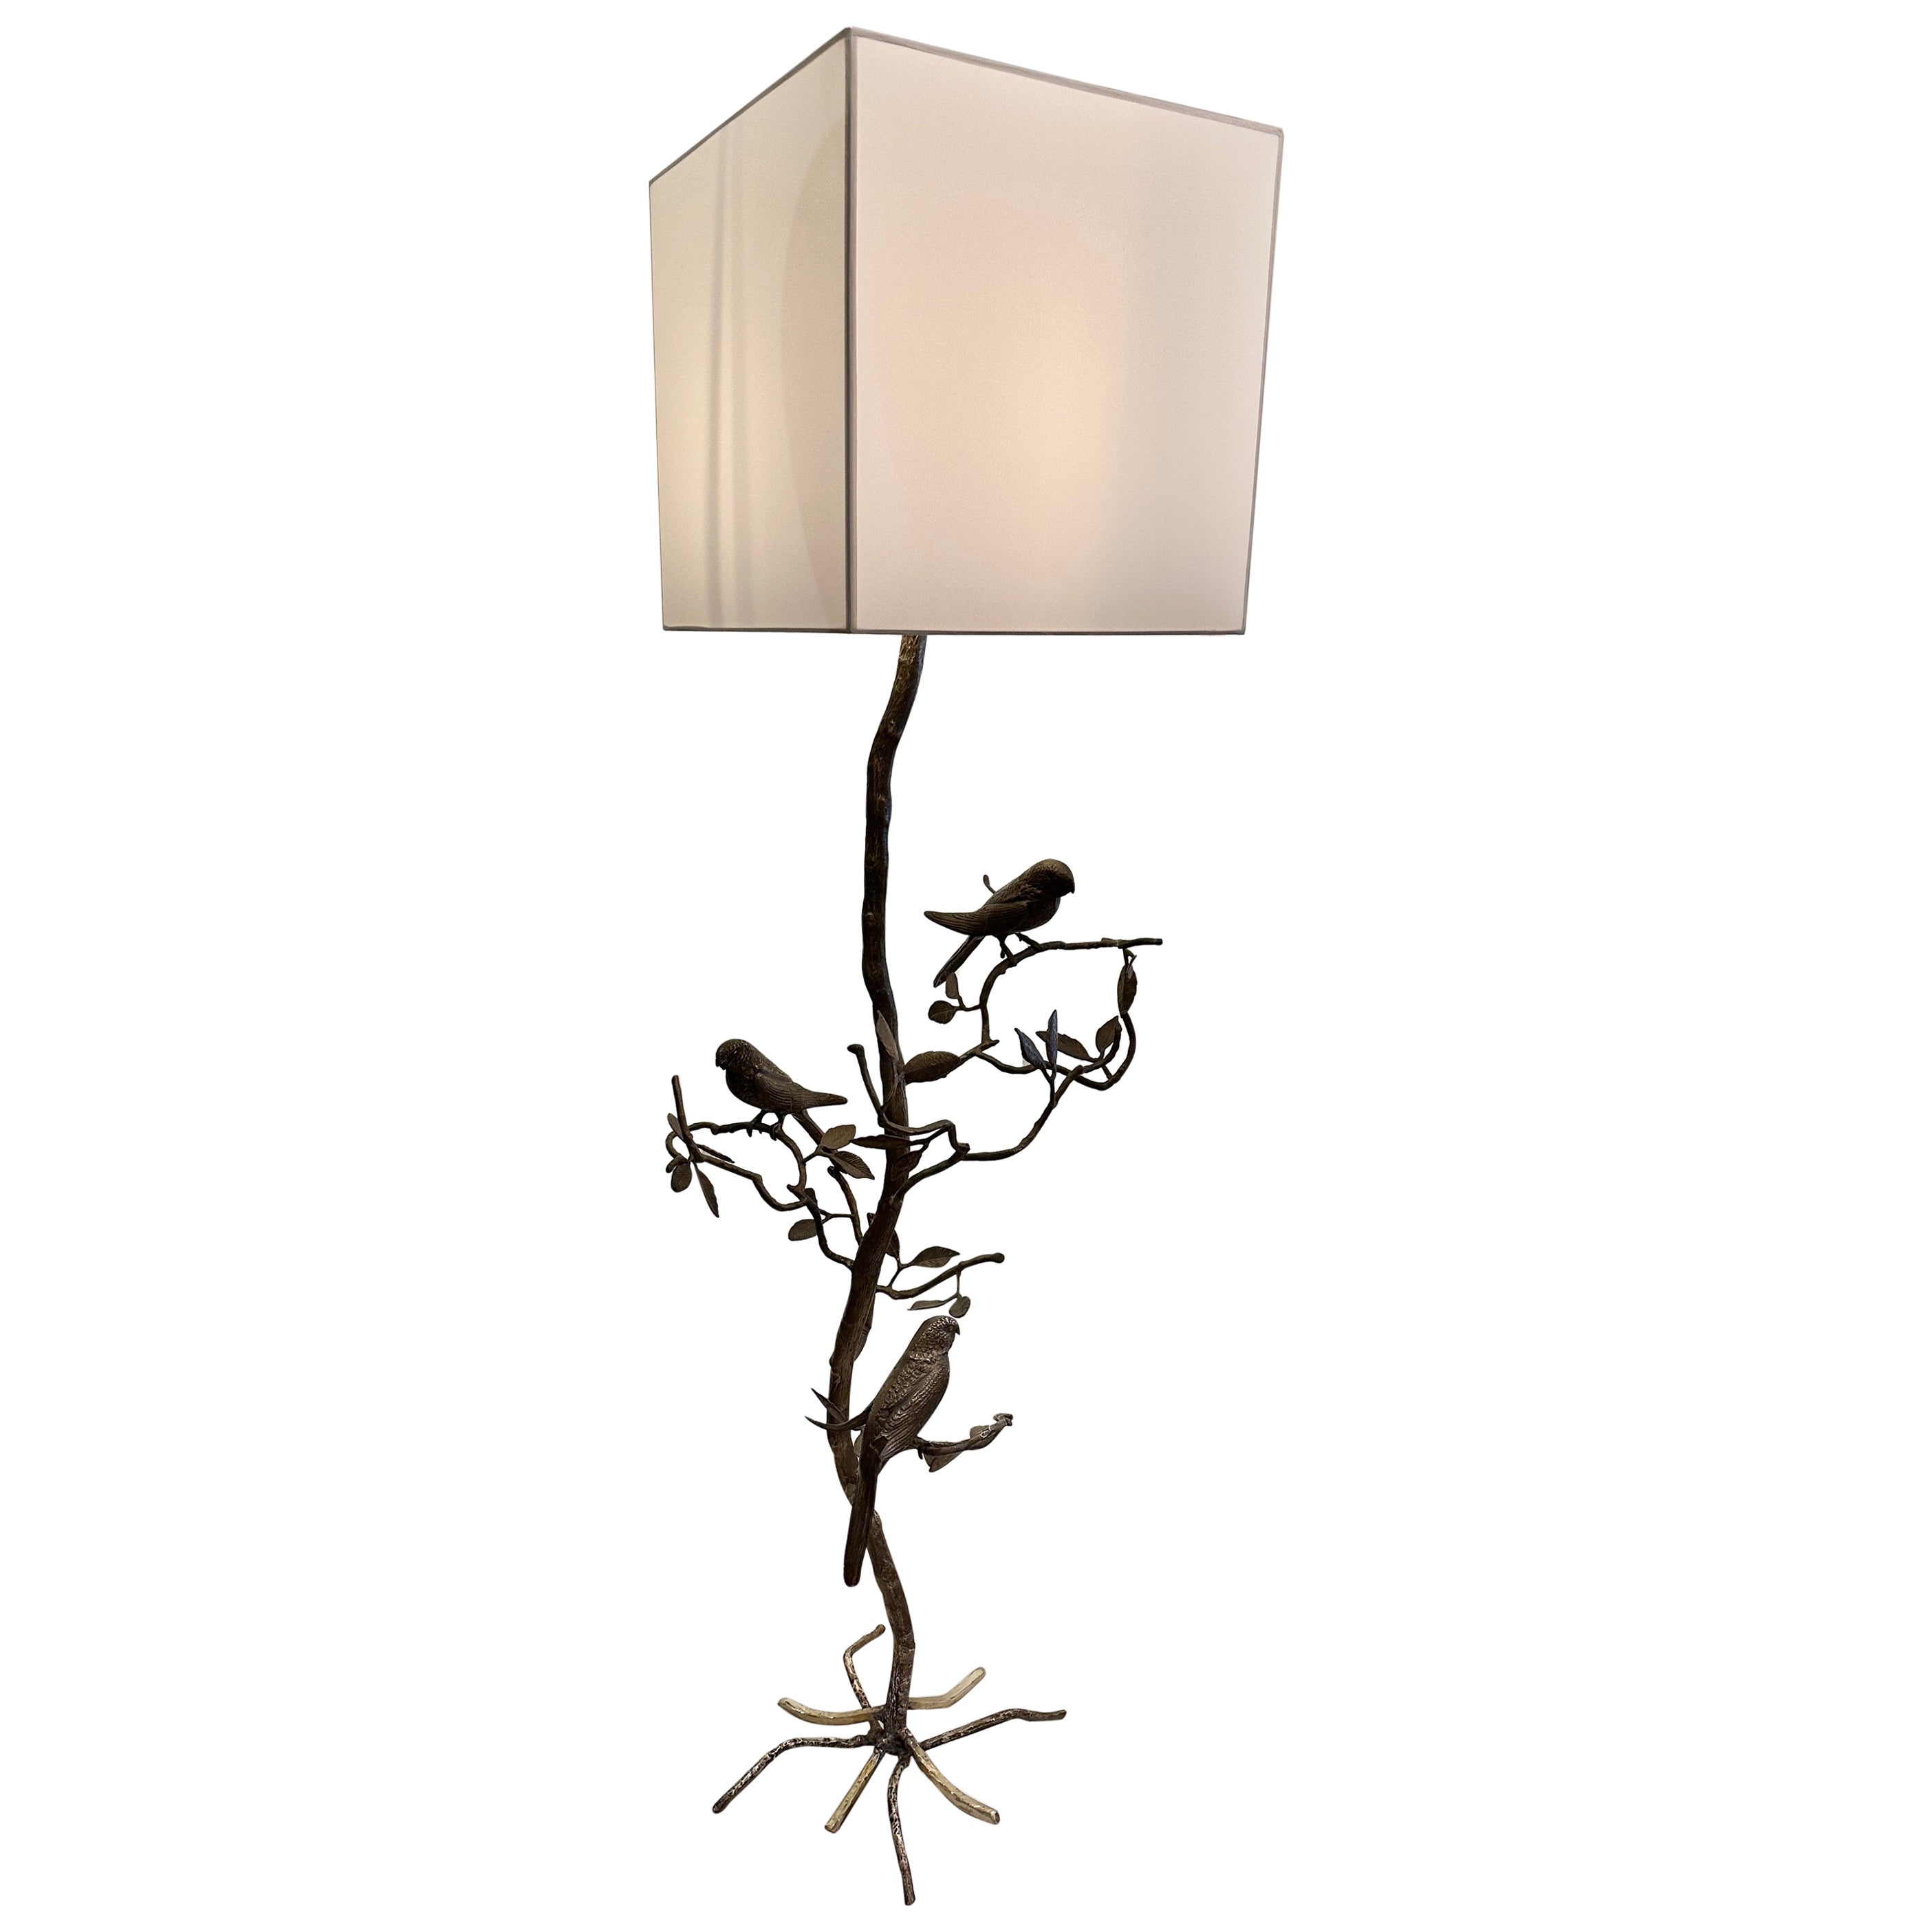 Vintage Bronze Floor Lamp with Parrots on Tree For Sale